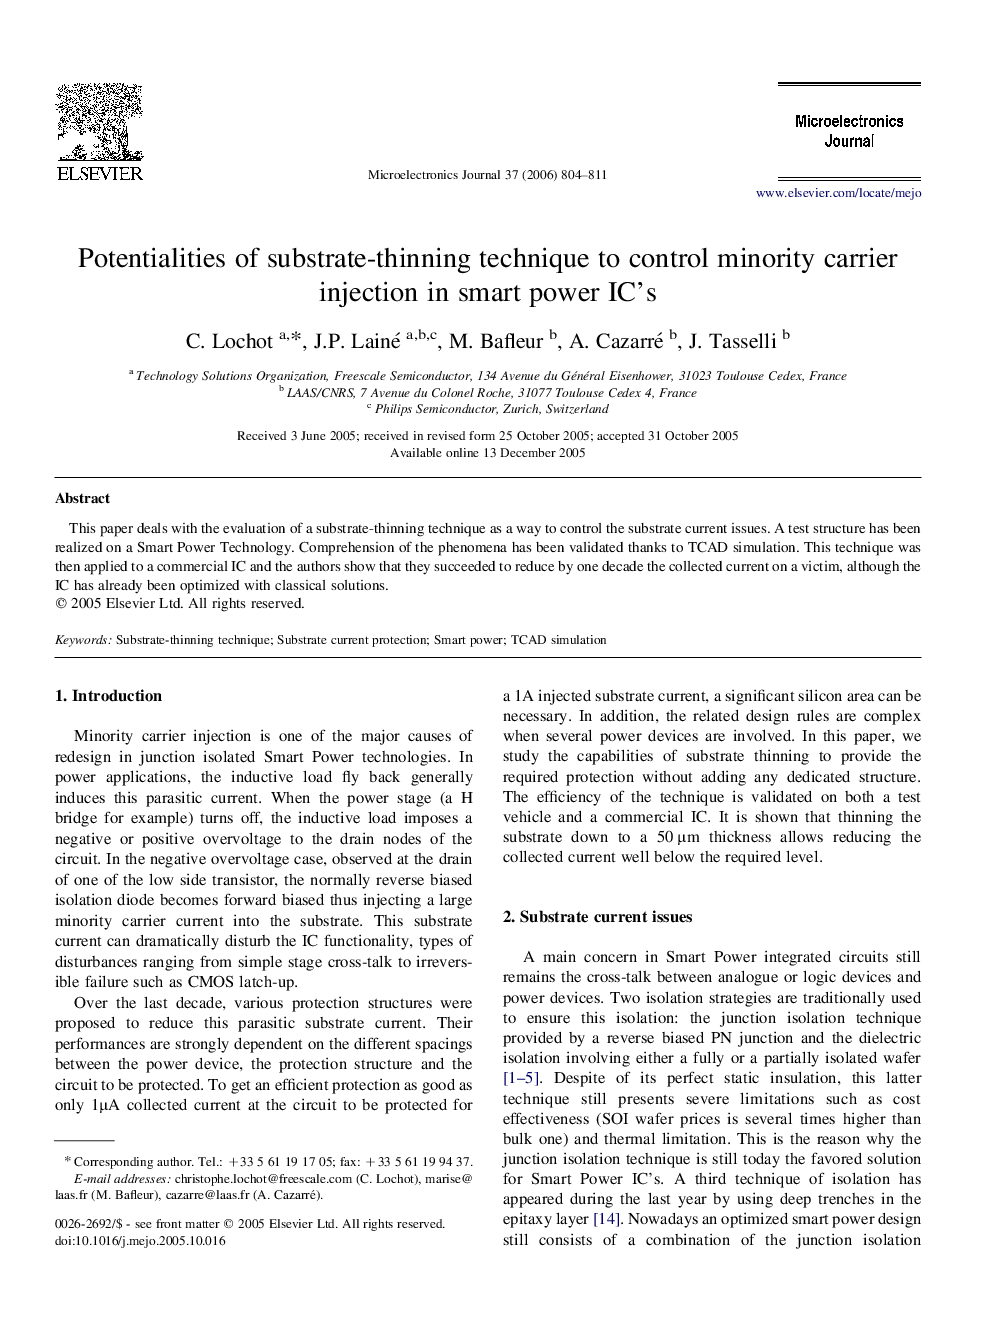 Potentialities of substrate-thinning technique to control minority carrier injection in smart power IC's